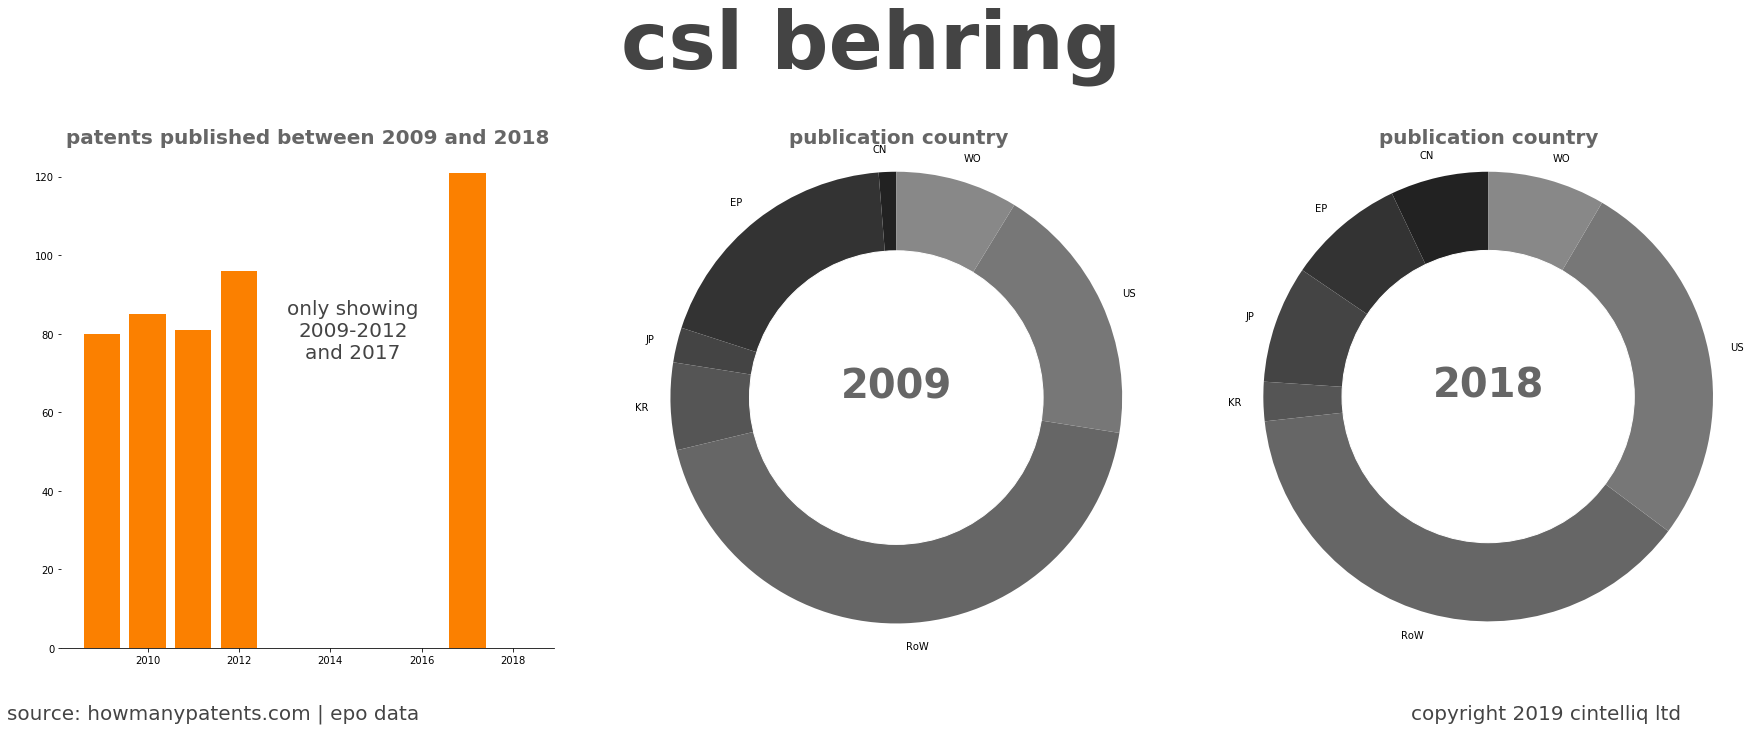 summary of patents for Csl Behring